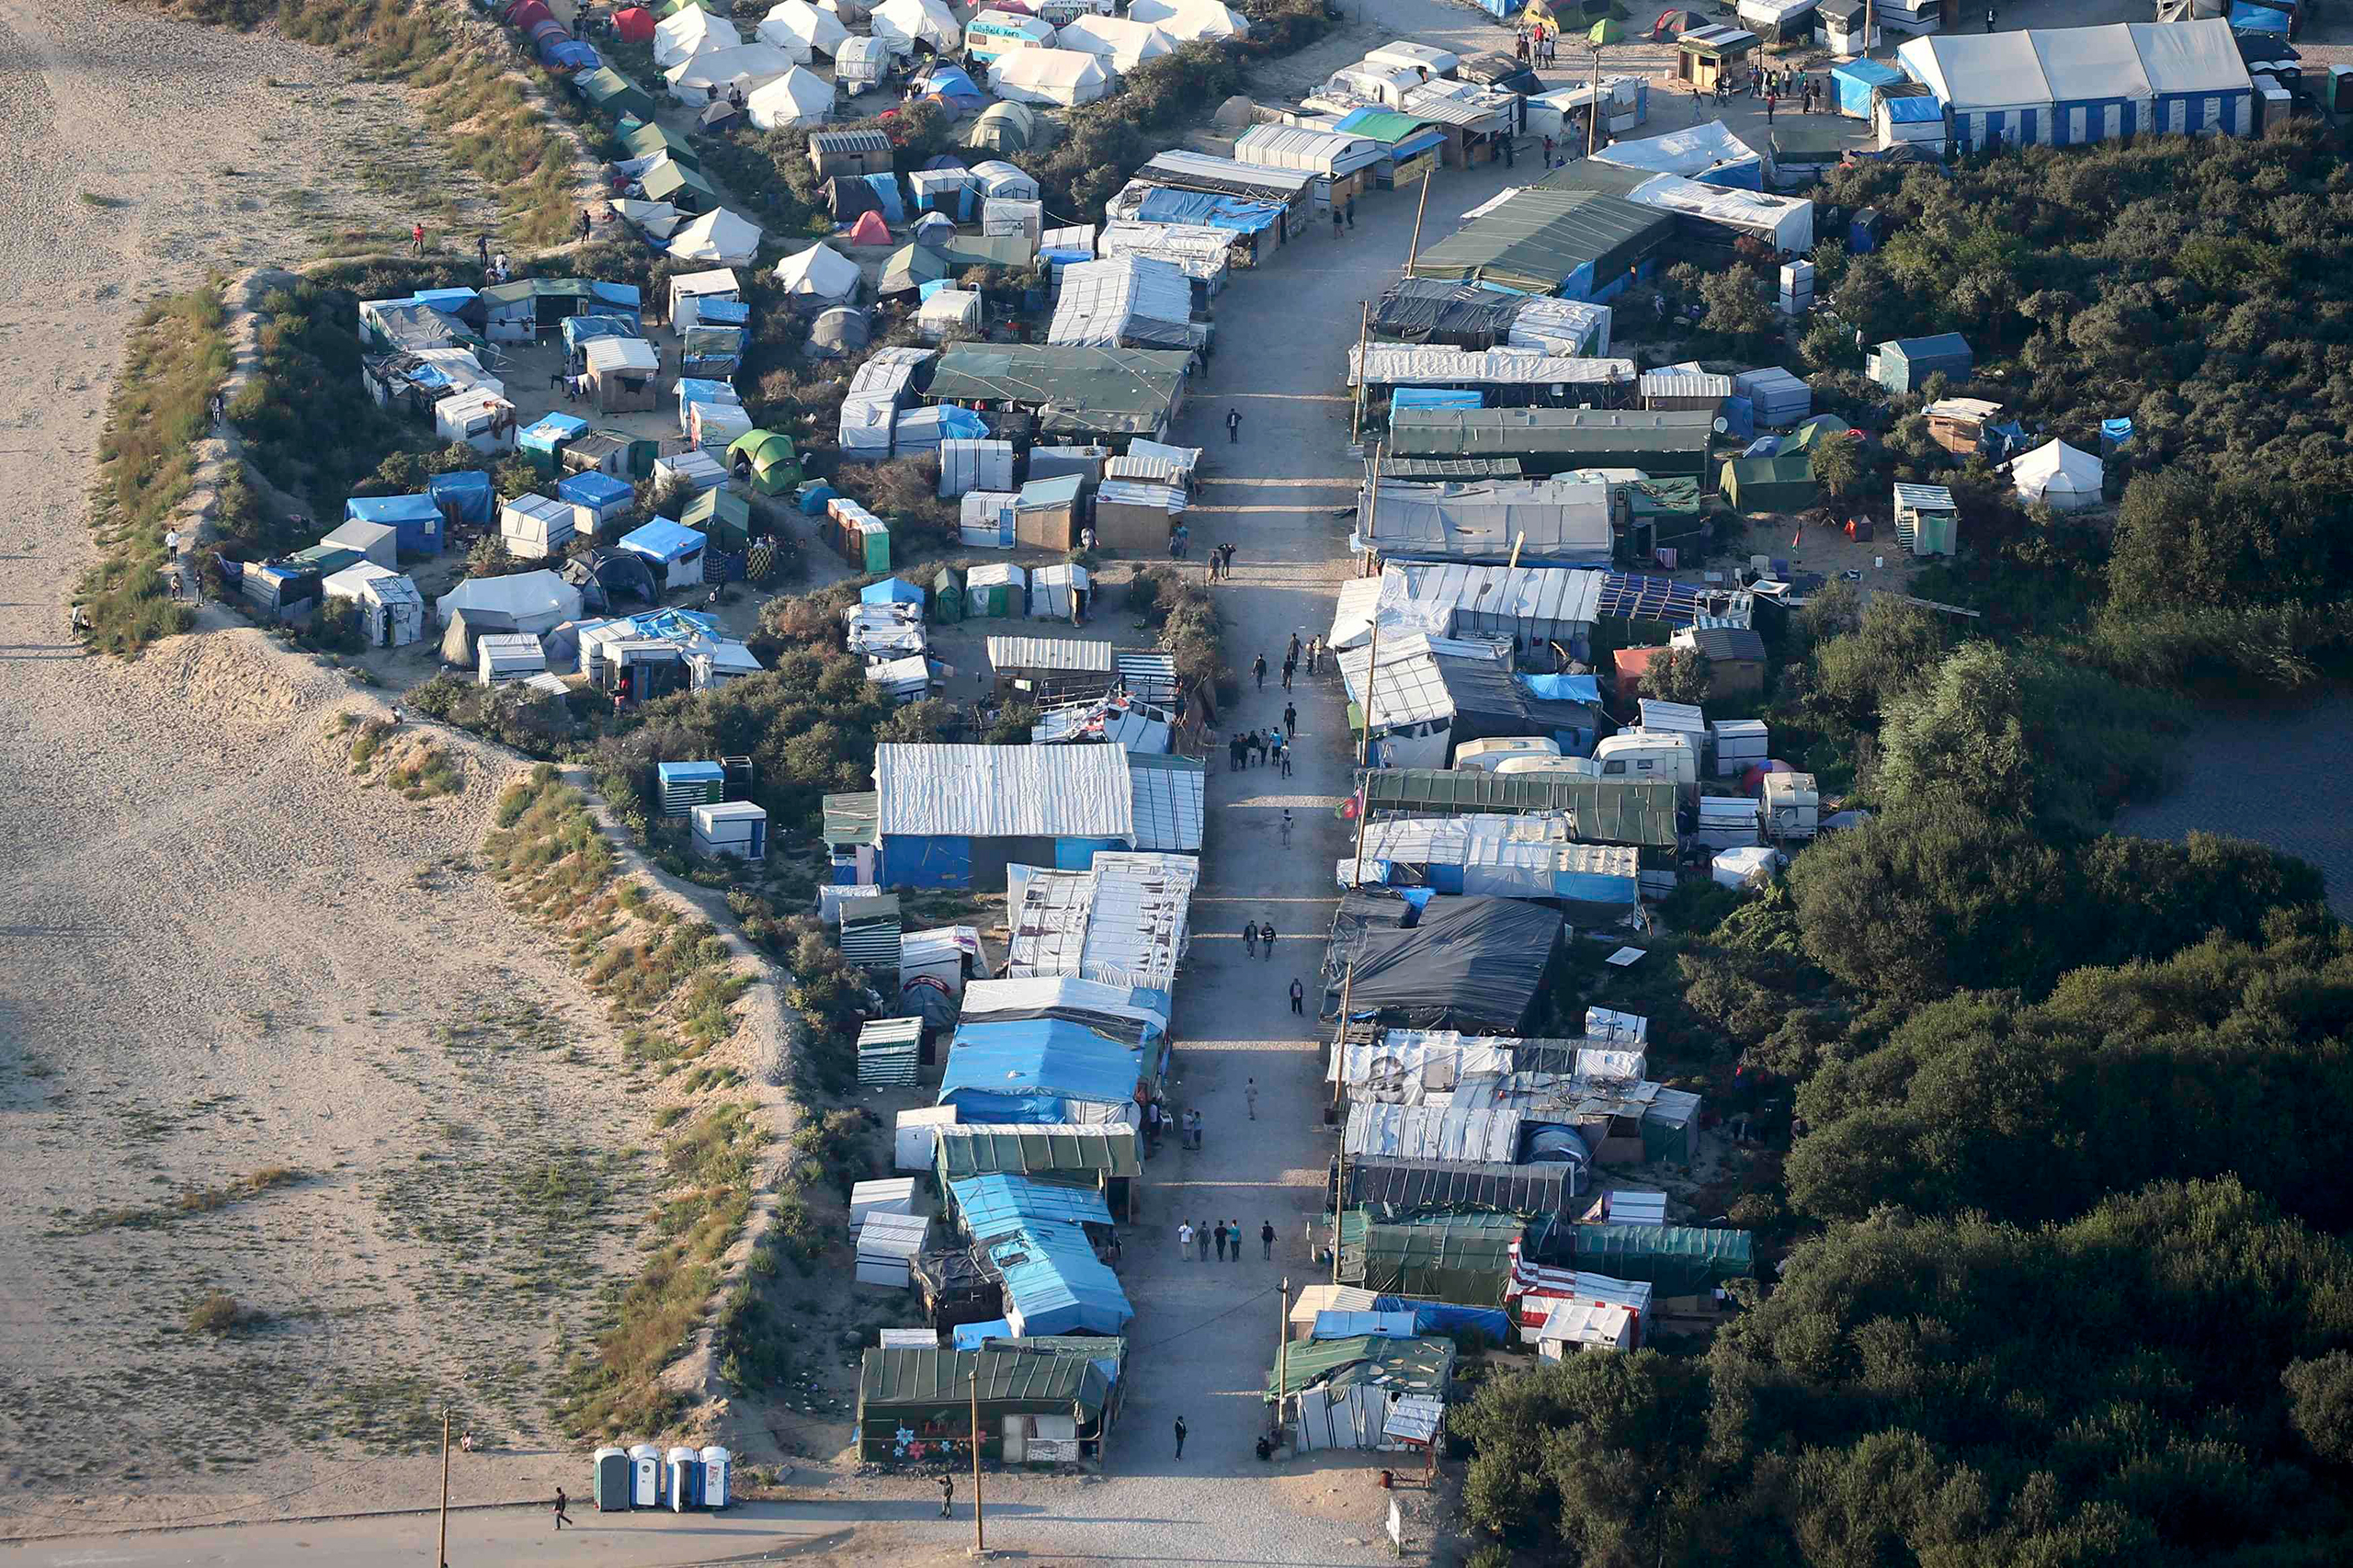 An aerial view shows makeshift shelters and tents where migrants live in what is known as 